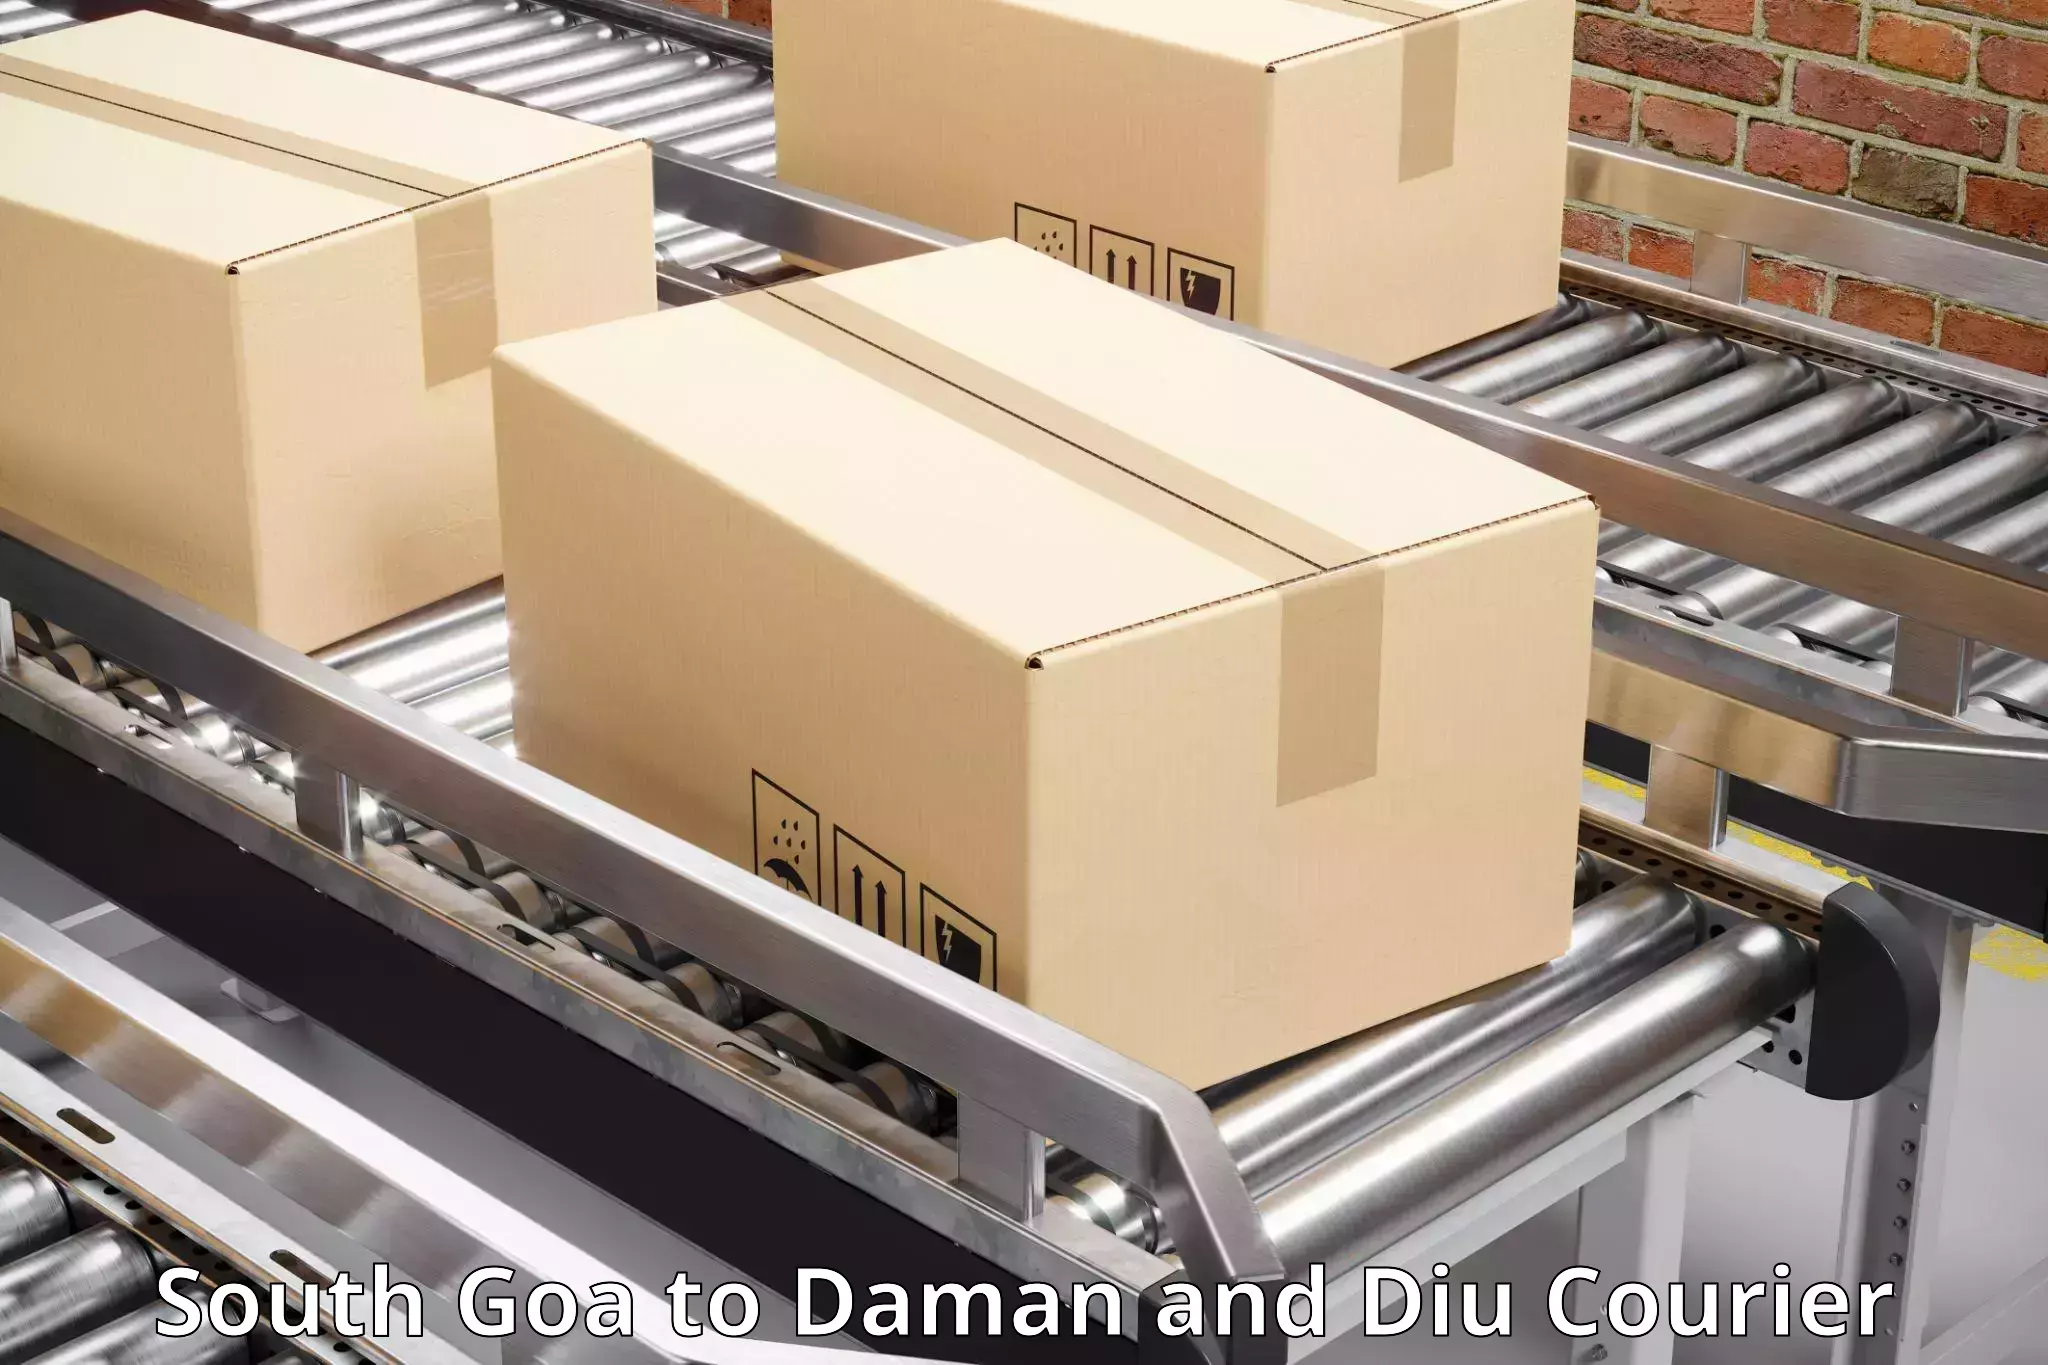 Express package handling in South Goa to Daman and Diu